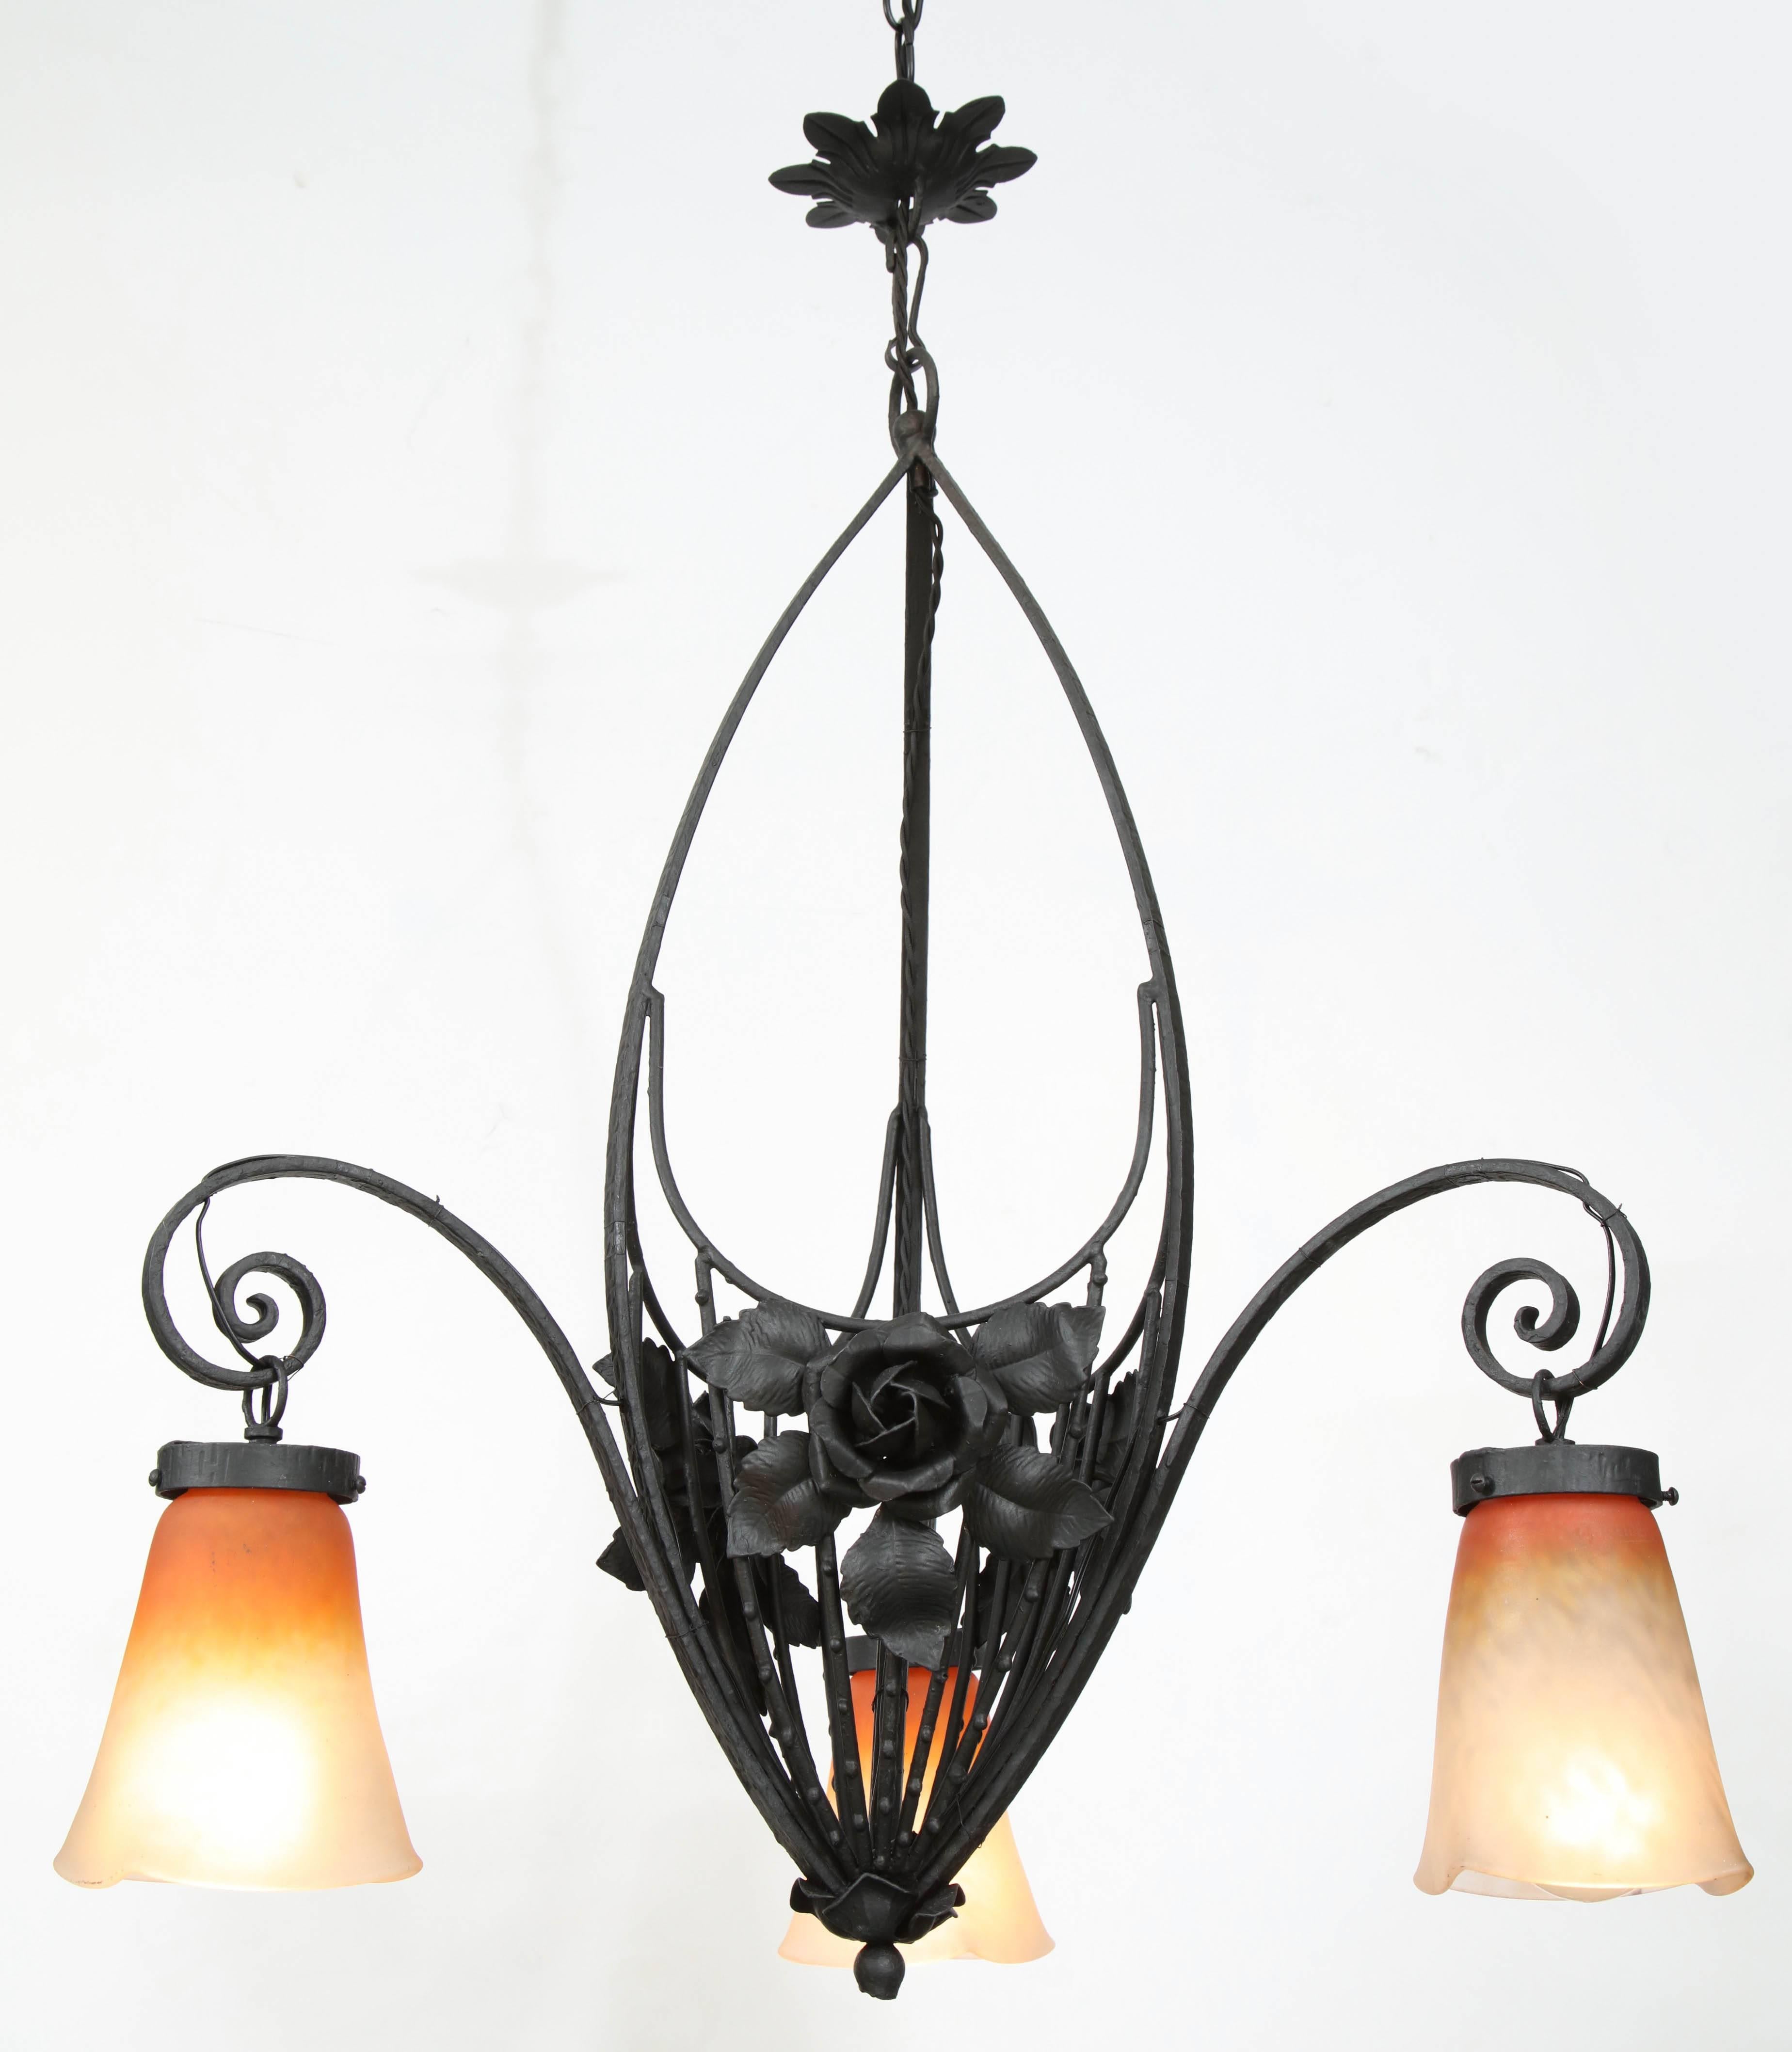 Art Nouveau lacquered metal chandelier with floral detail and orange and white vaseline shades, signed Schneider.